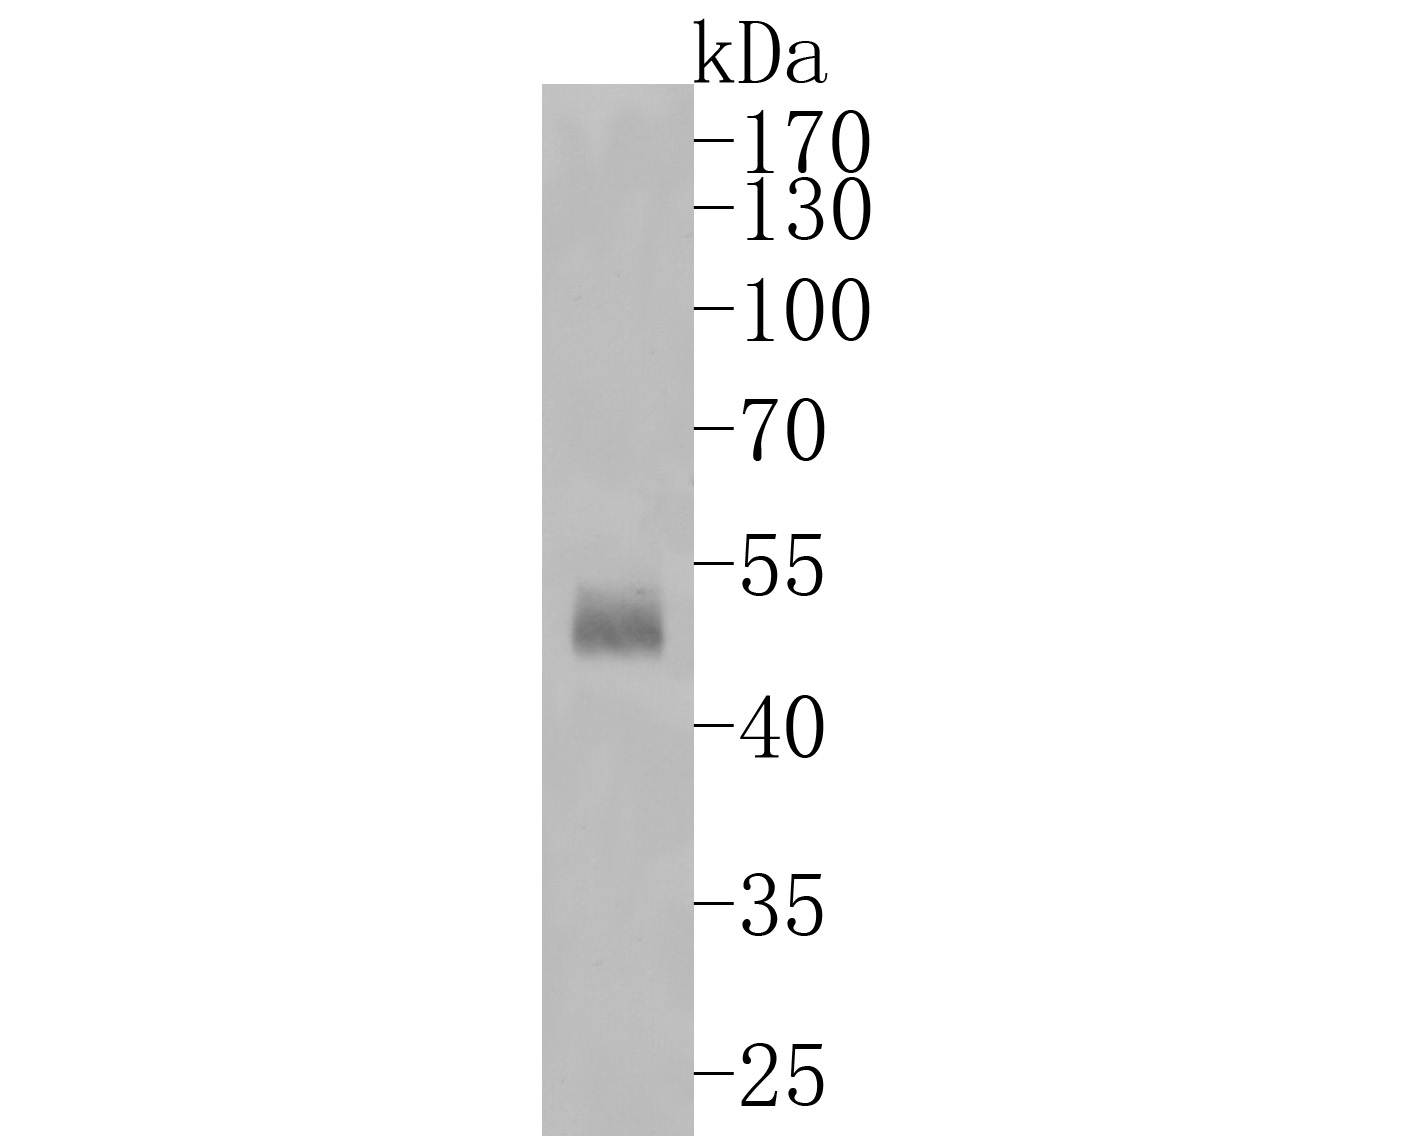 Western blot analysis of Cytokeratin 13 on human lung tissue lysates. Proteins were transferred to a PVDF membrane and blocked with 5% BSA in PBS for 1 hour at room temperature. The primary antibody (ET1611-55, 1/500) was used in 5% BSA at room temperature for 2 hours. Goat Anti-Rabbit IgG - HRP Secondary Antibody (HA1001) at 1:200,000 dilution was used for 1 hour at room temperature.